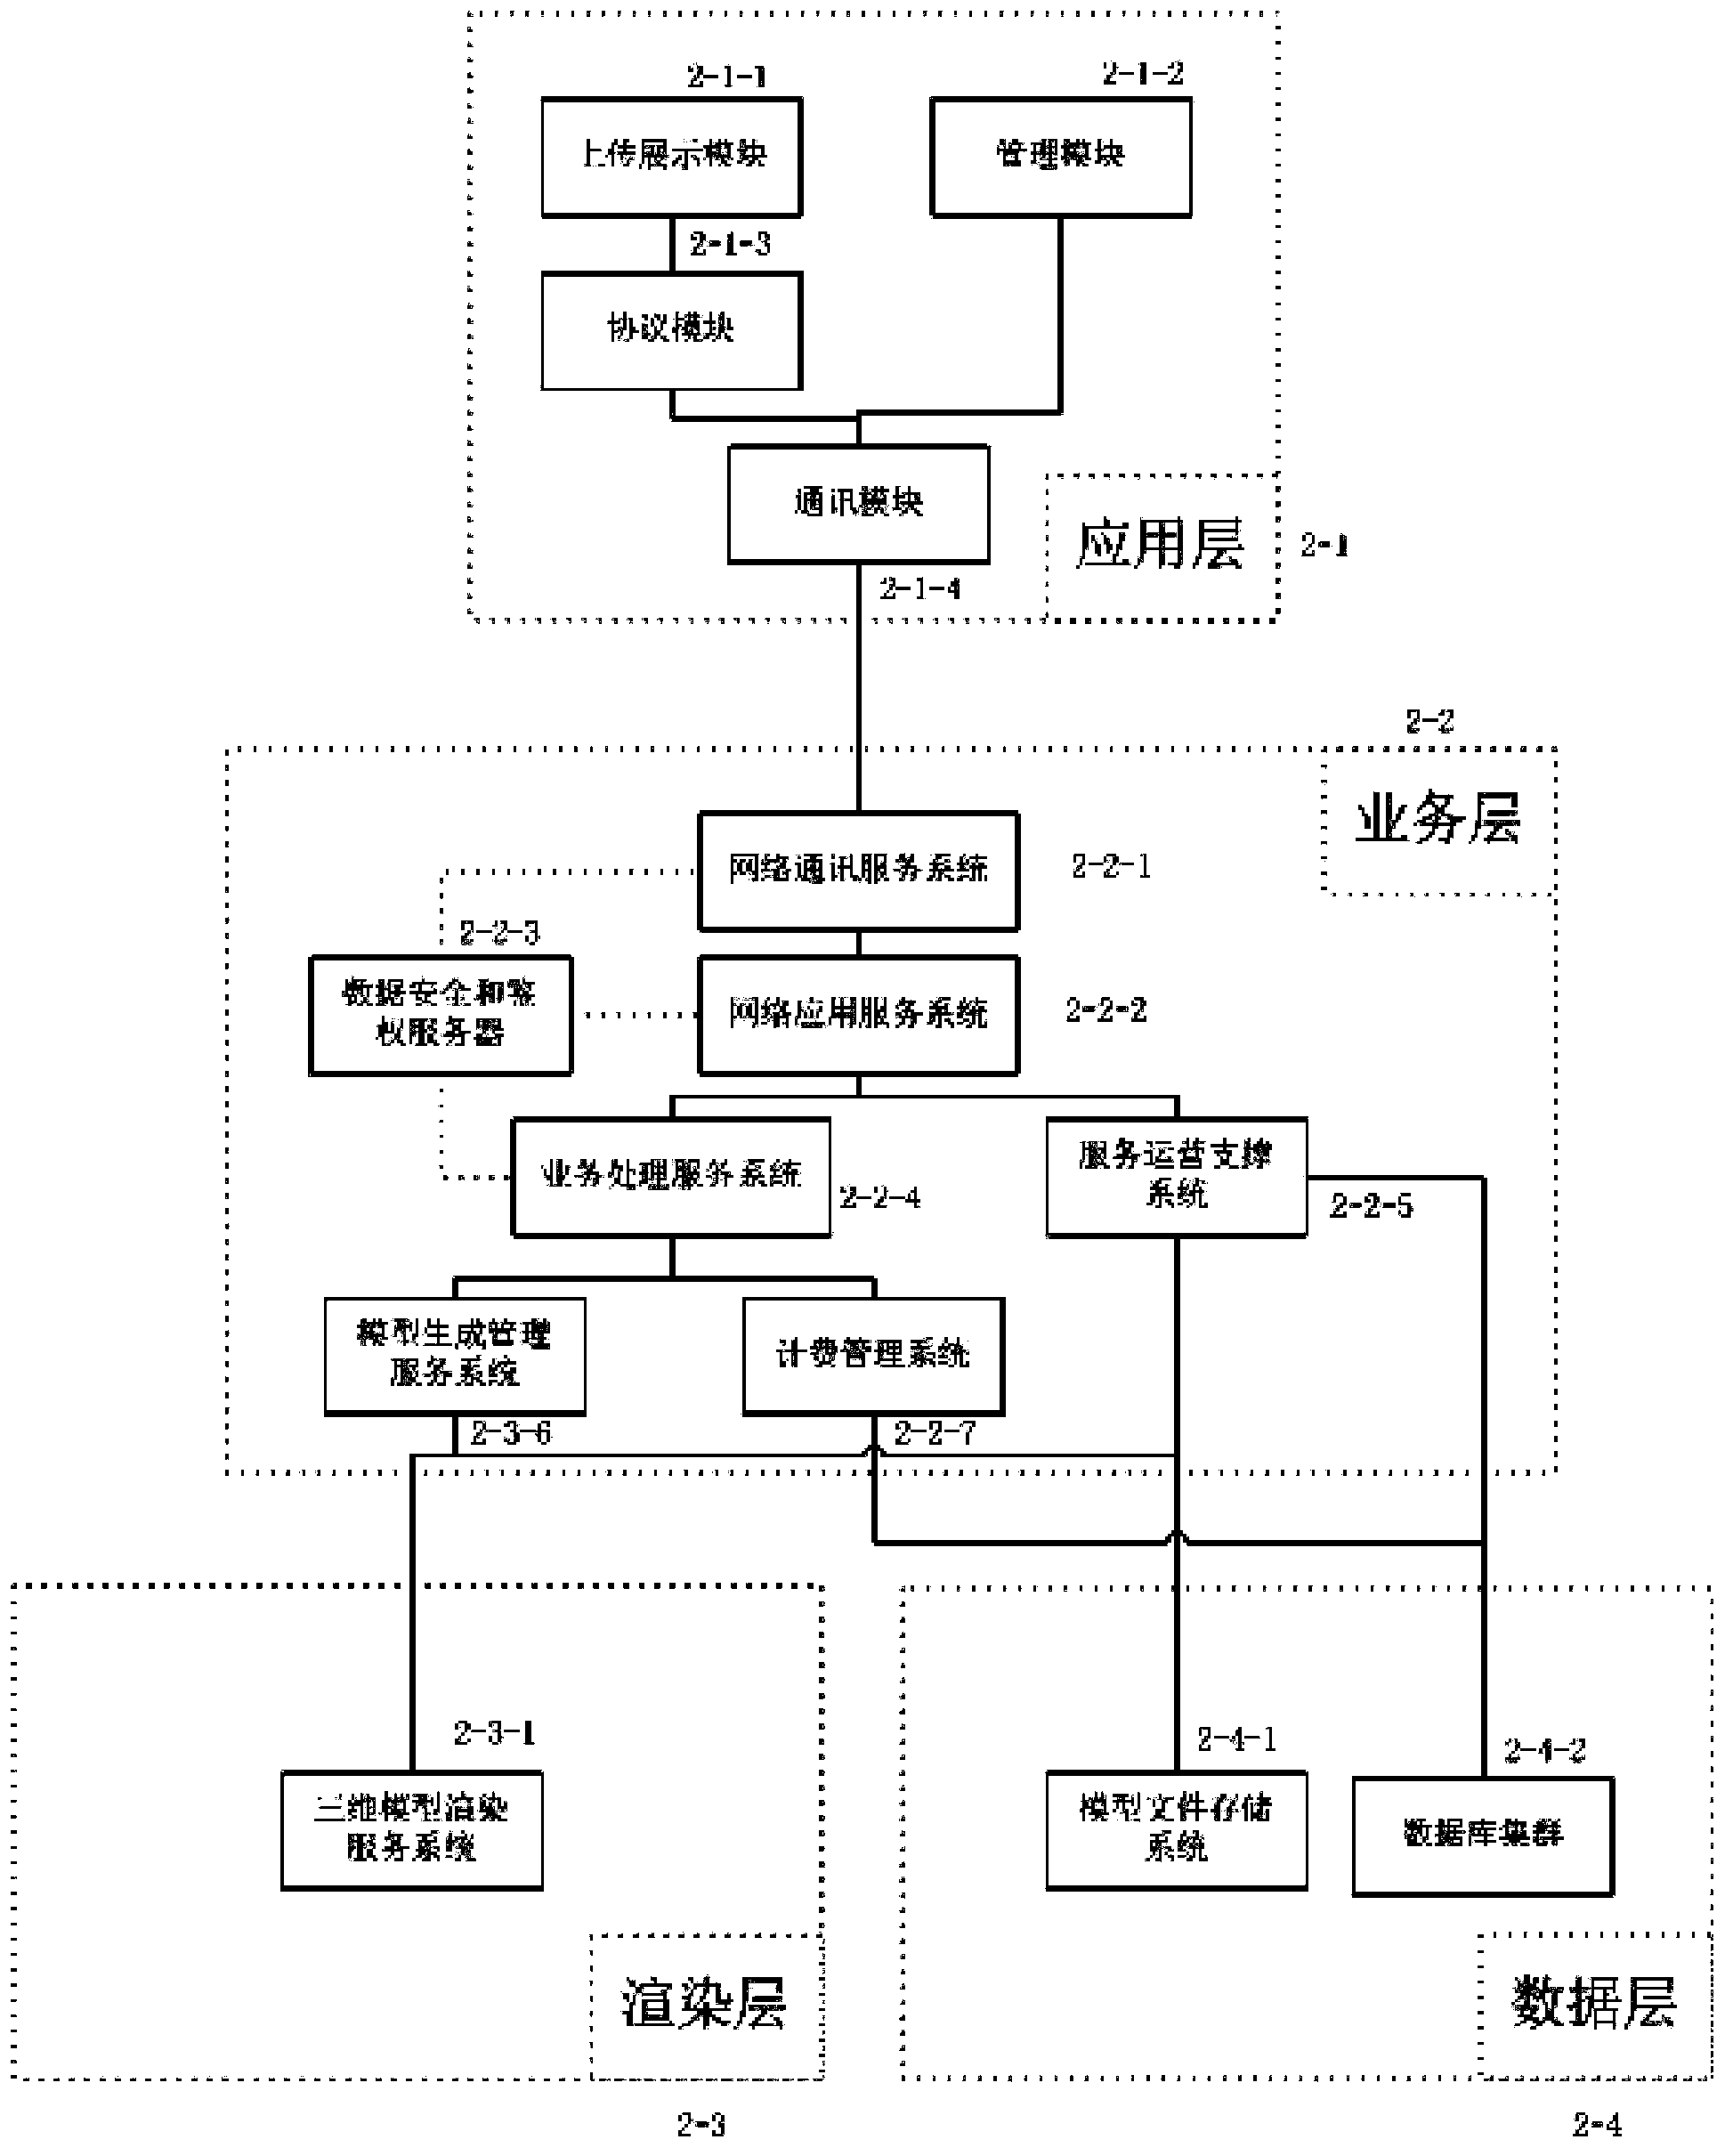 Implementation method and system for automatic generation and on-line interaction of three-dimensional digital model with planar space structure